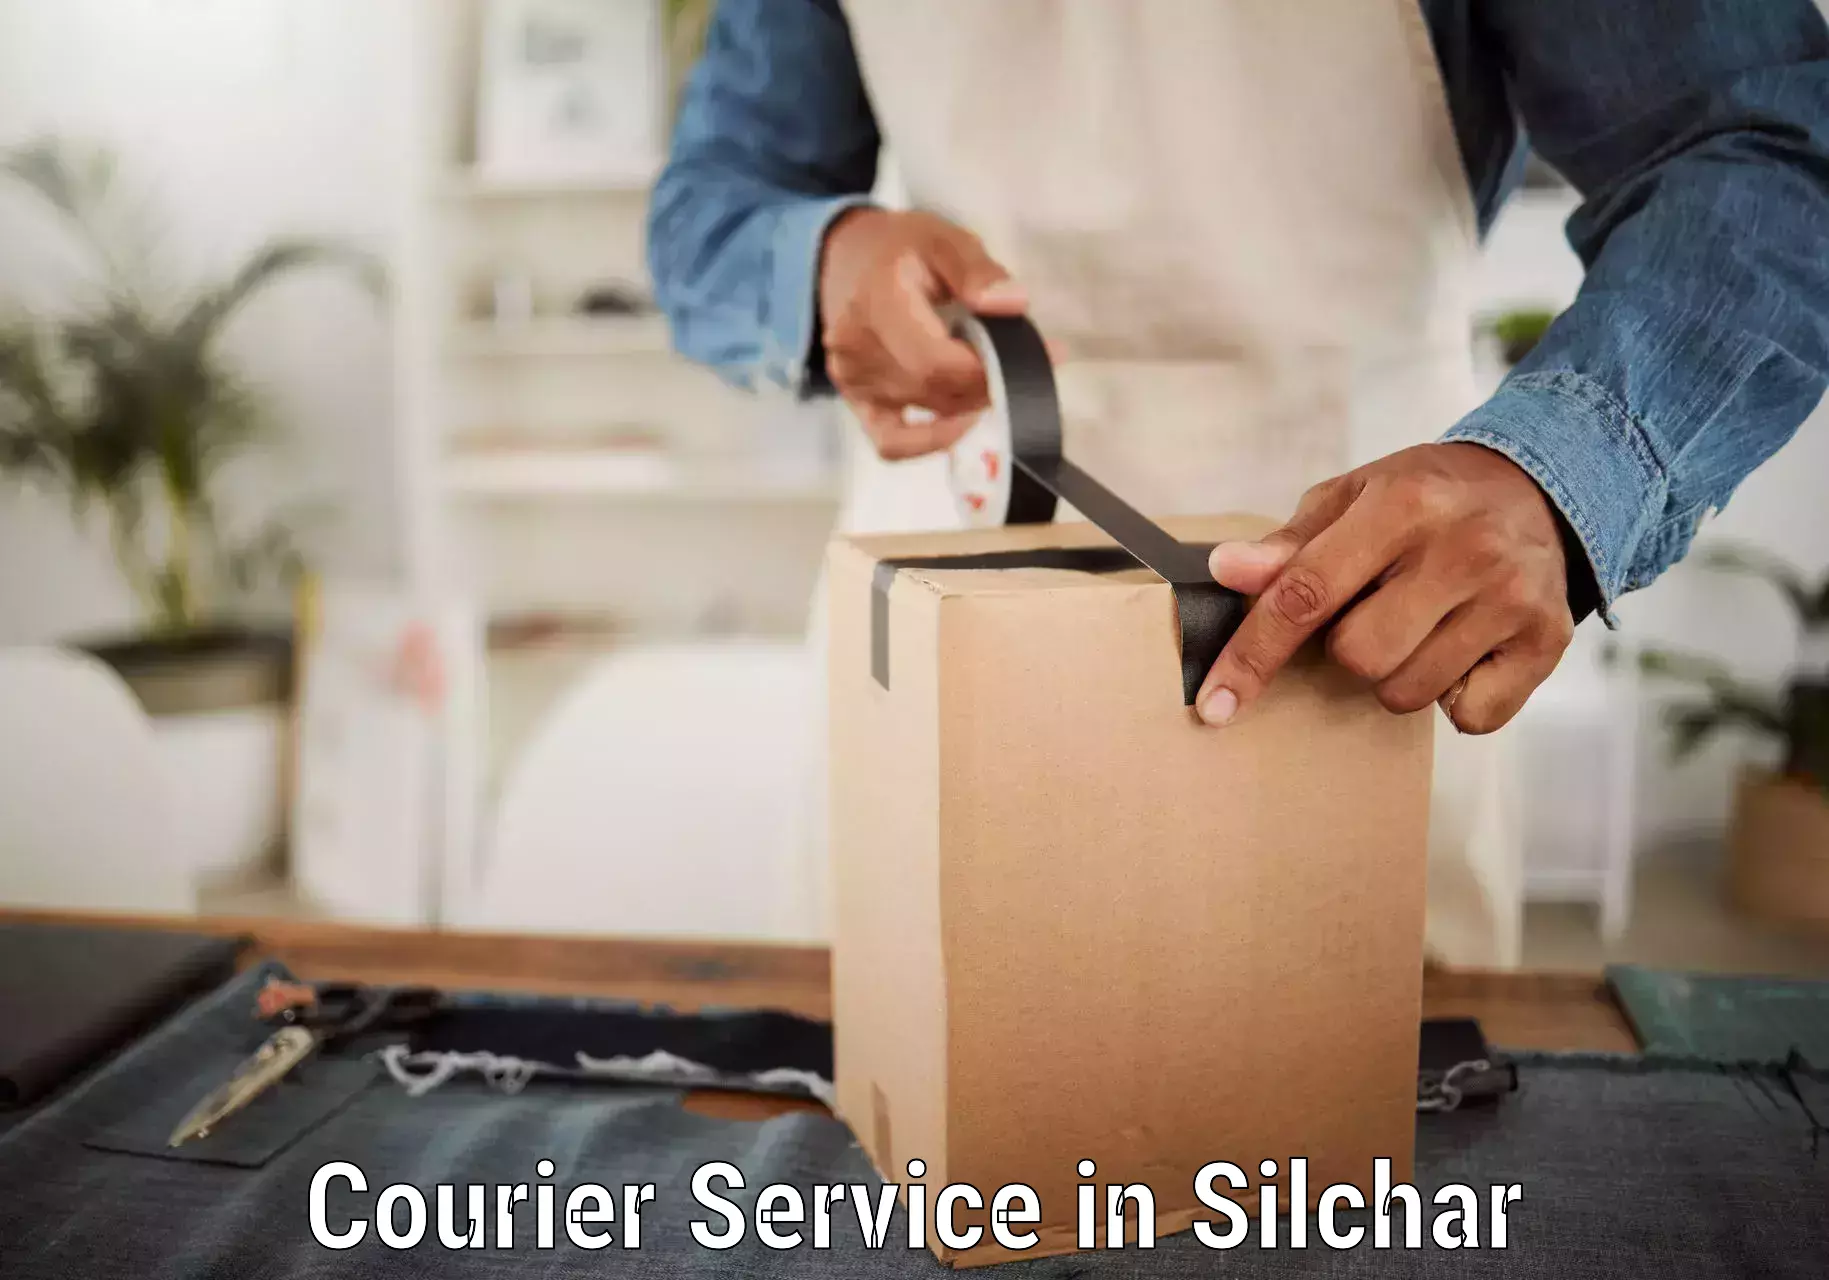 Full-service courier options in Silchar